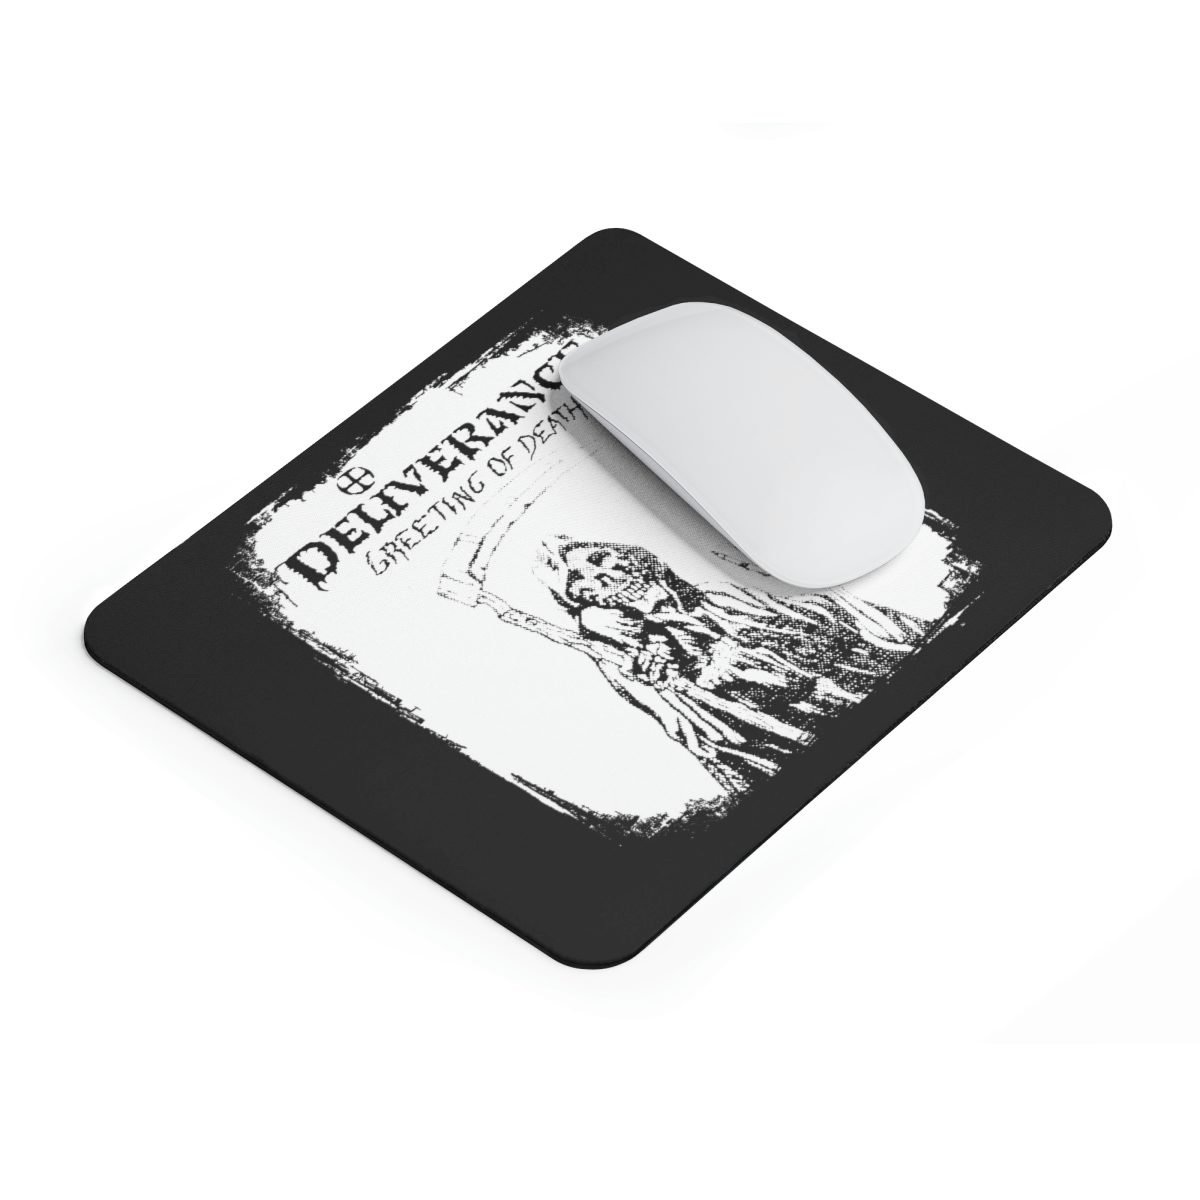 Deliverance – Greeting of Death Mouse Pad